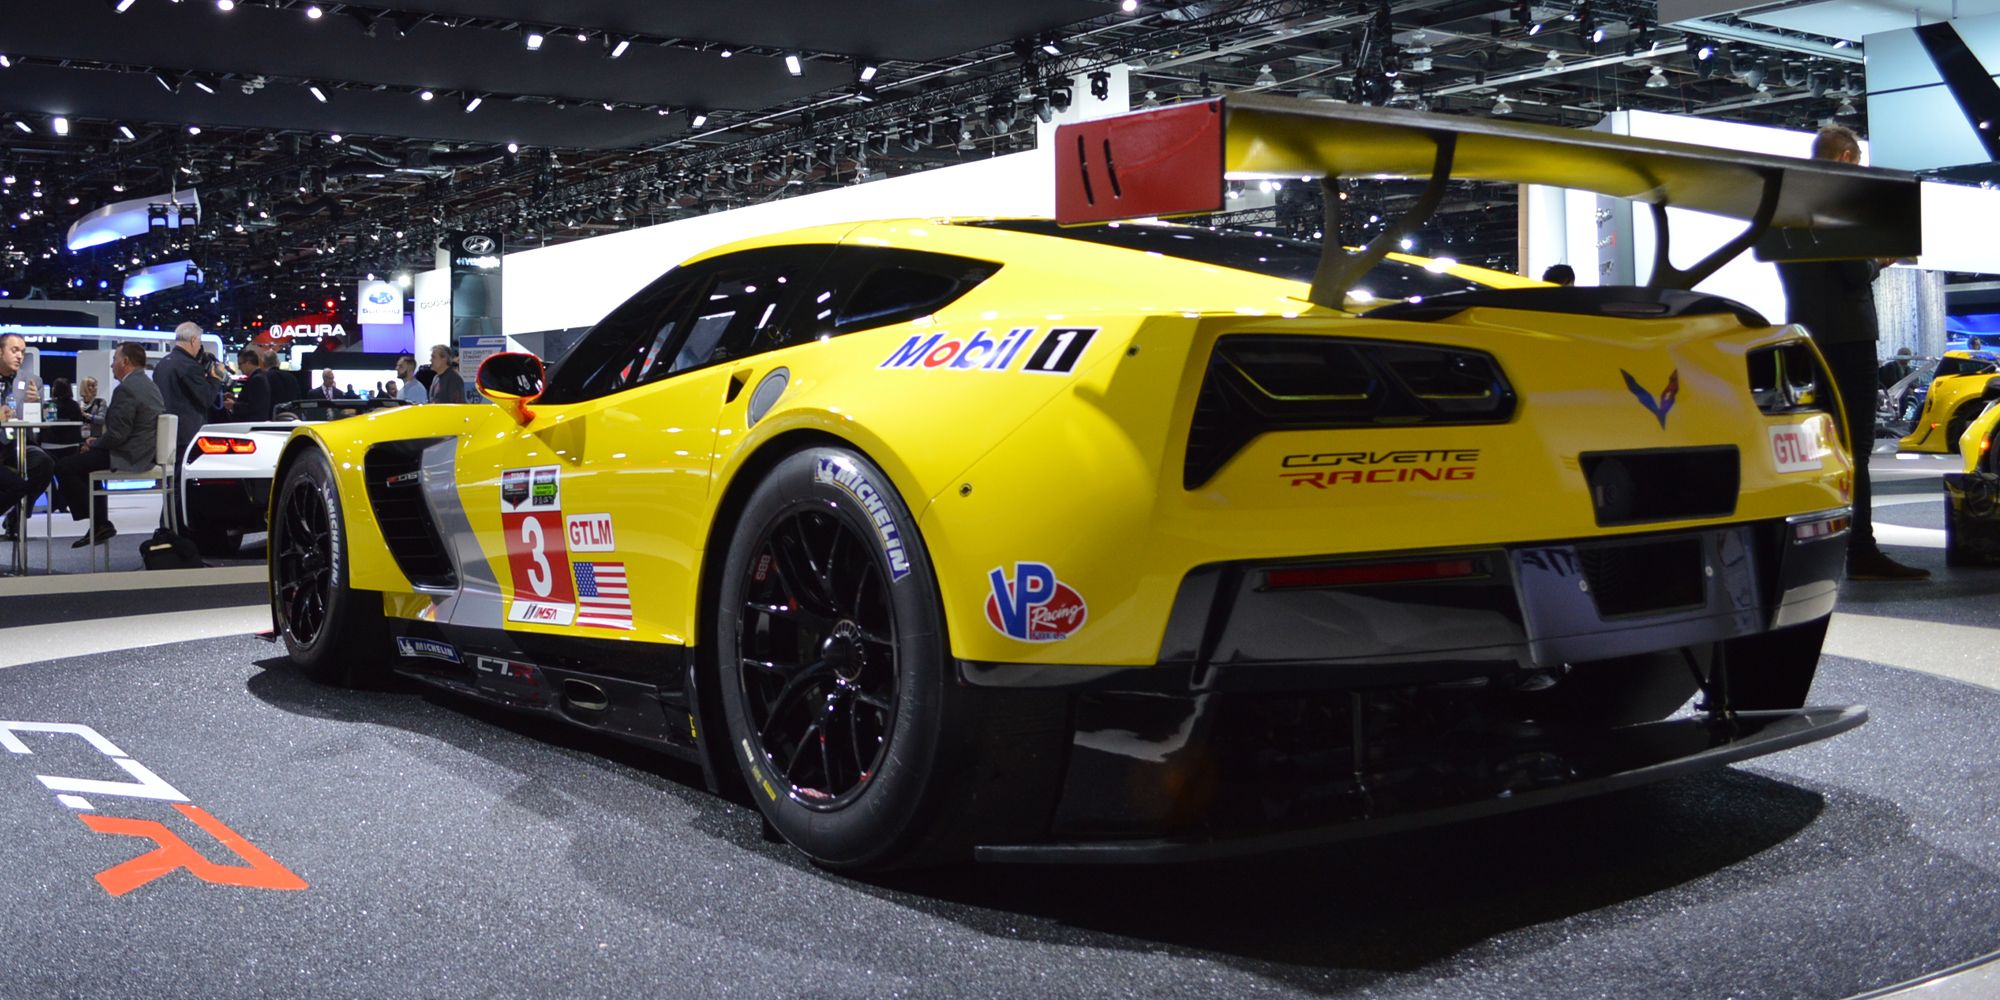 The rear of the C7.R